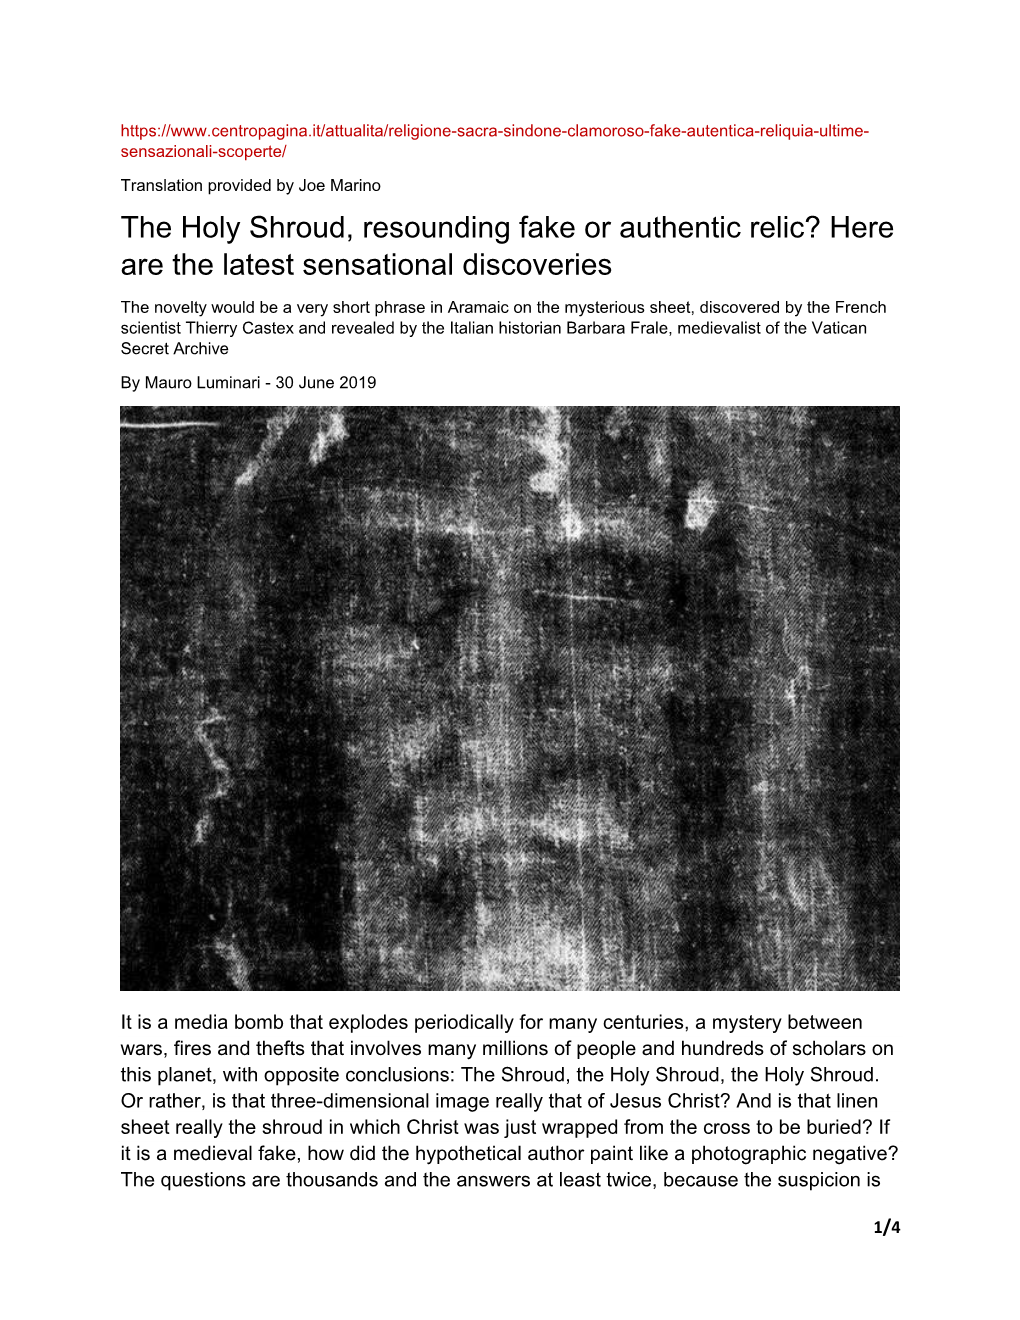 The Holy Shroud, Resounding Fake Or Authentic Relic? Here Are the Latest Sensational Discoveries